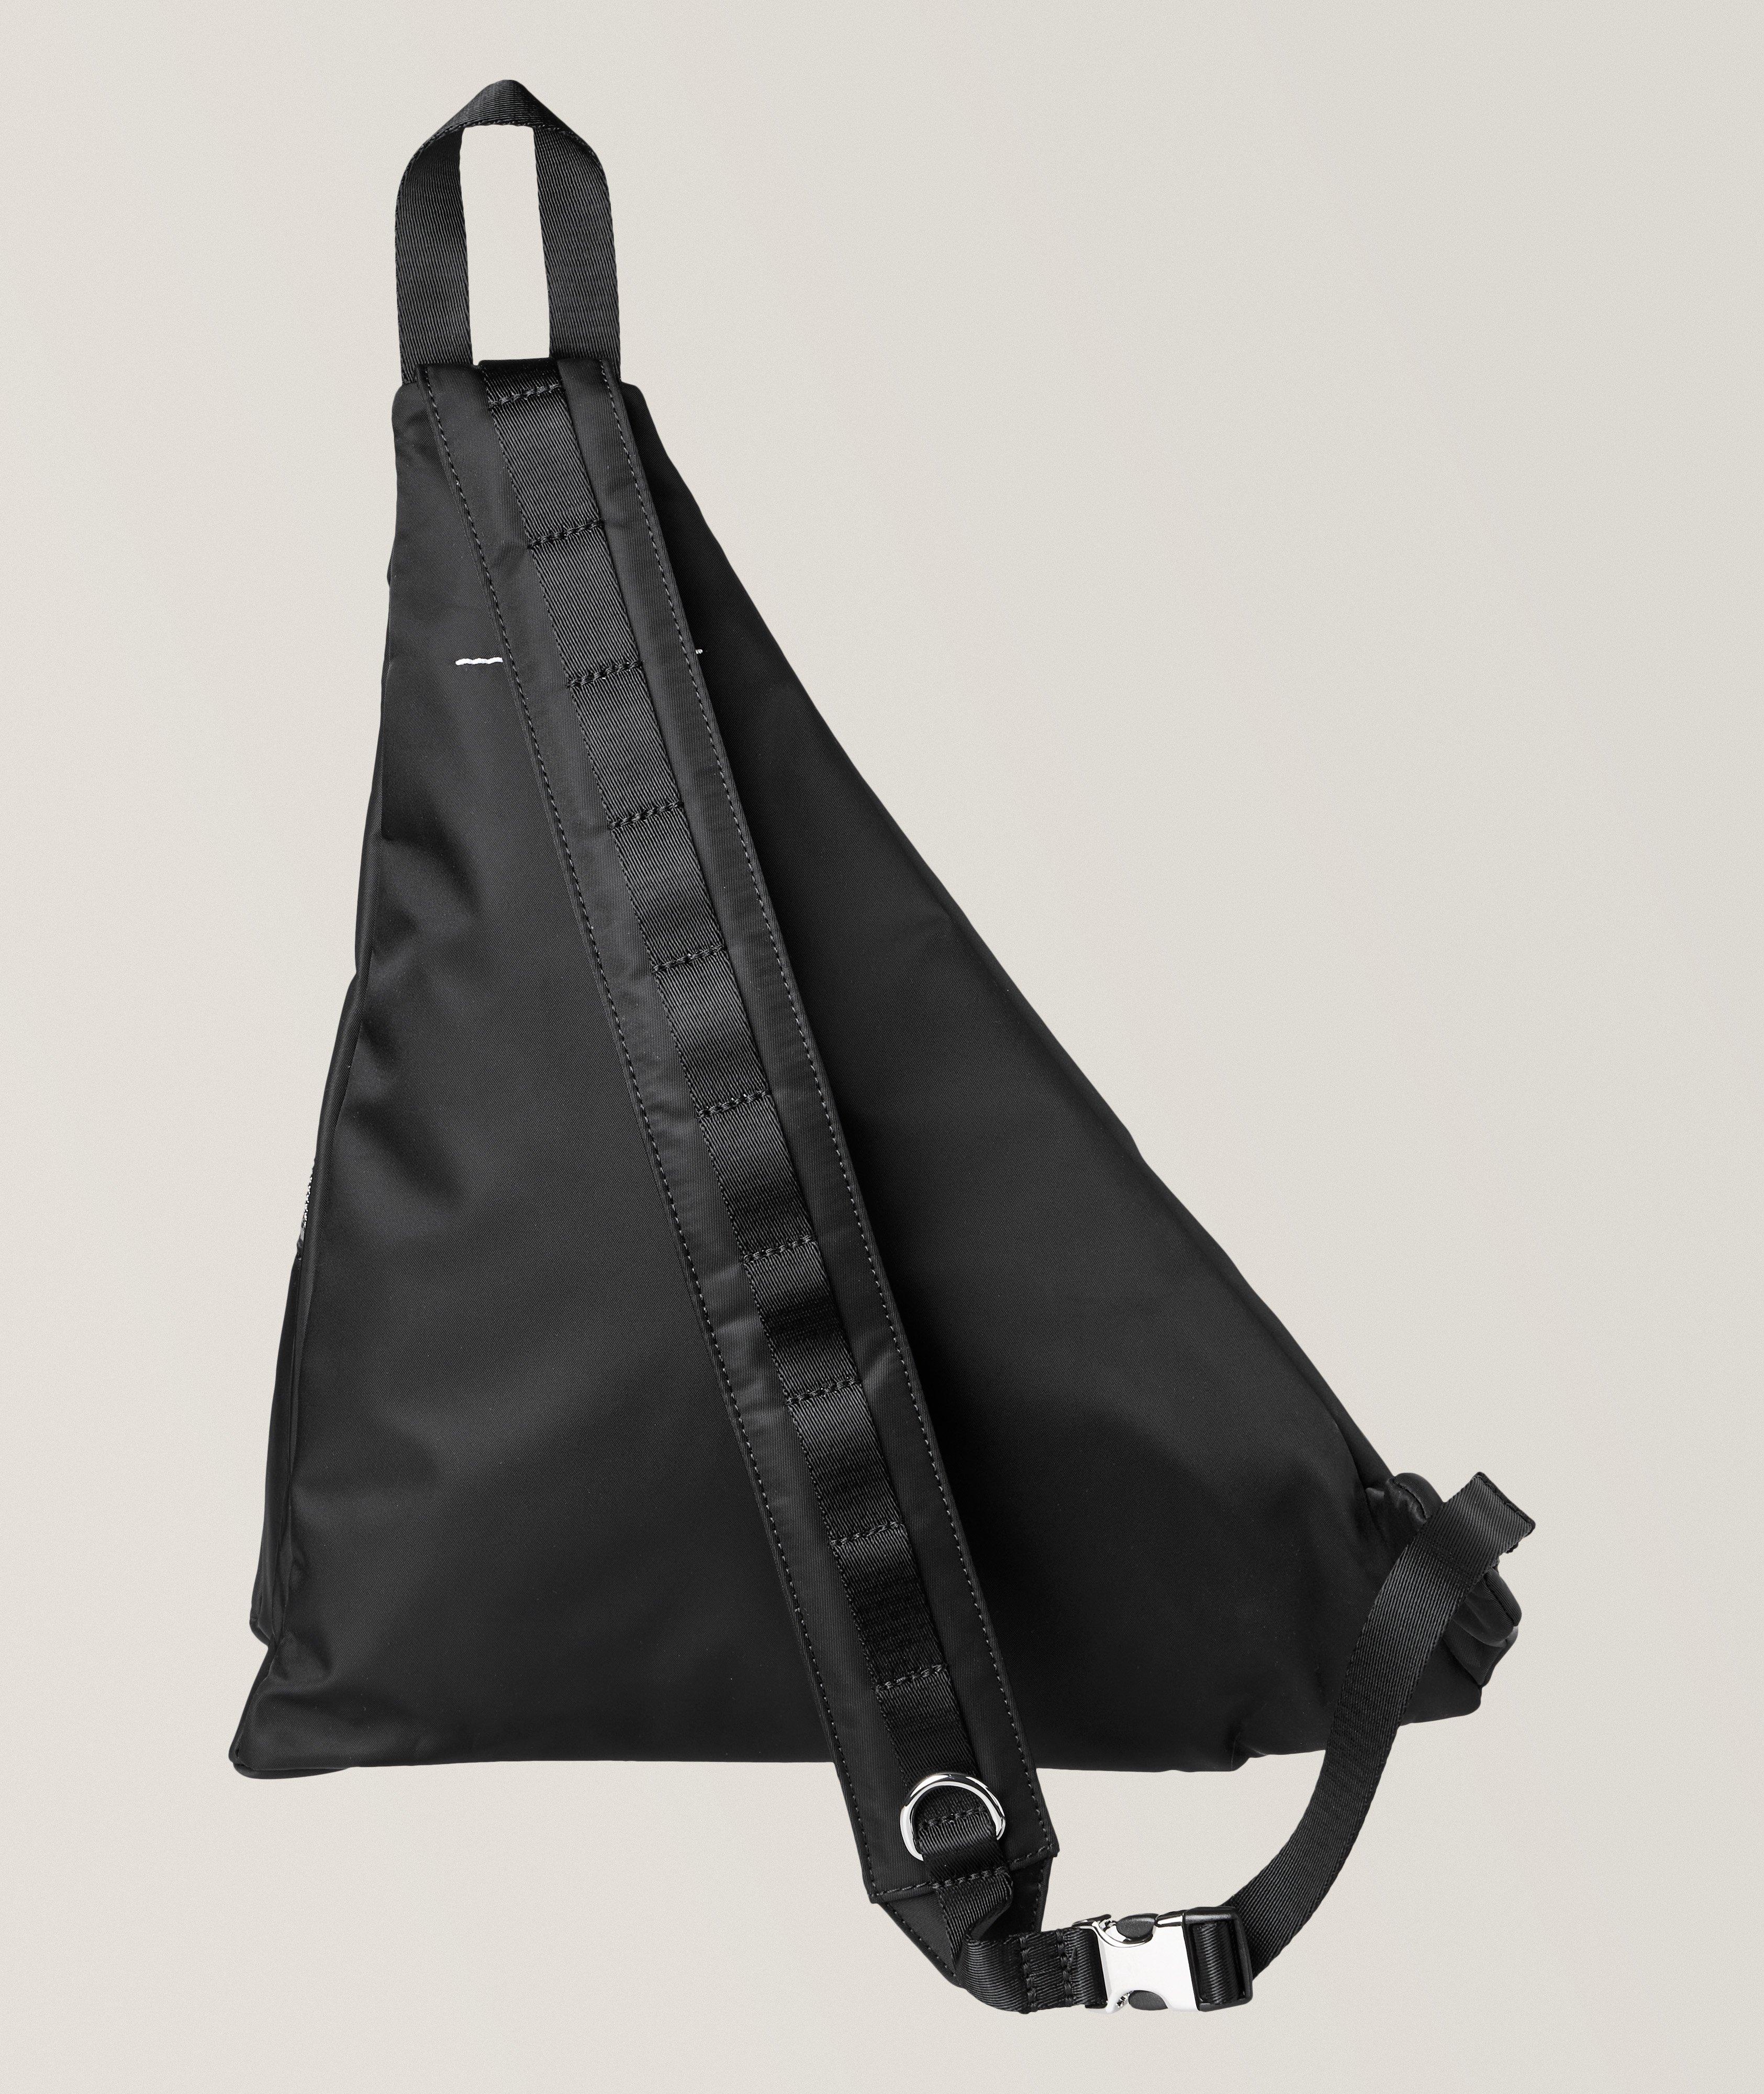 Triangle Technical Fabric Sling Bag  image 1